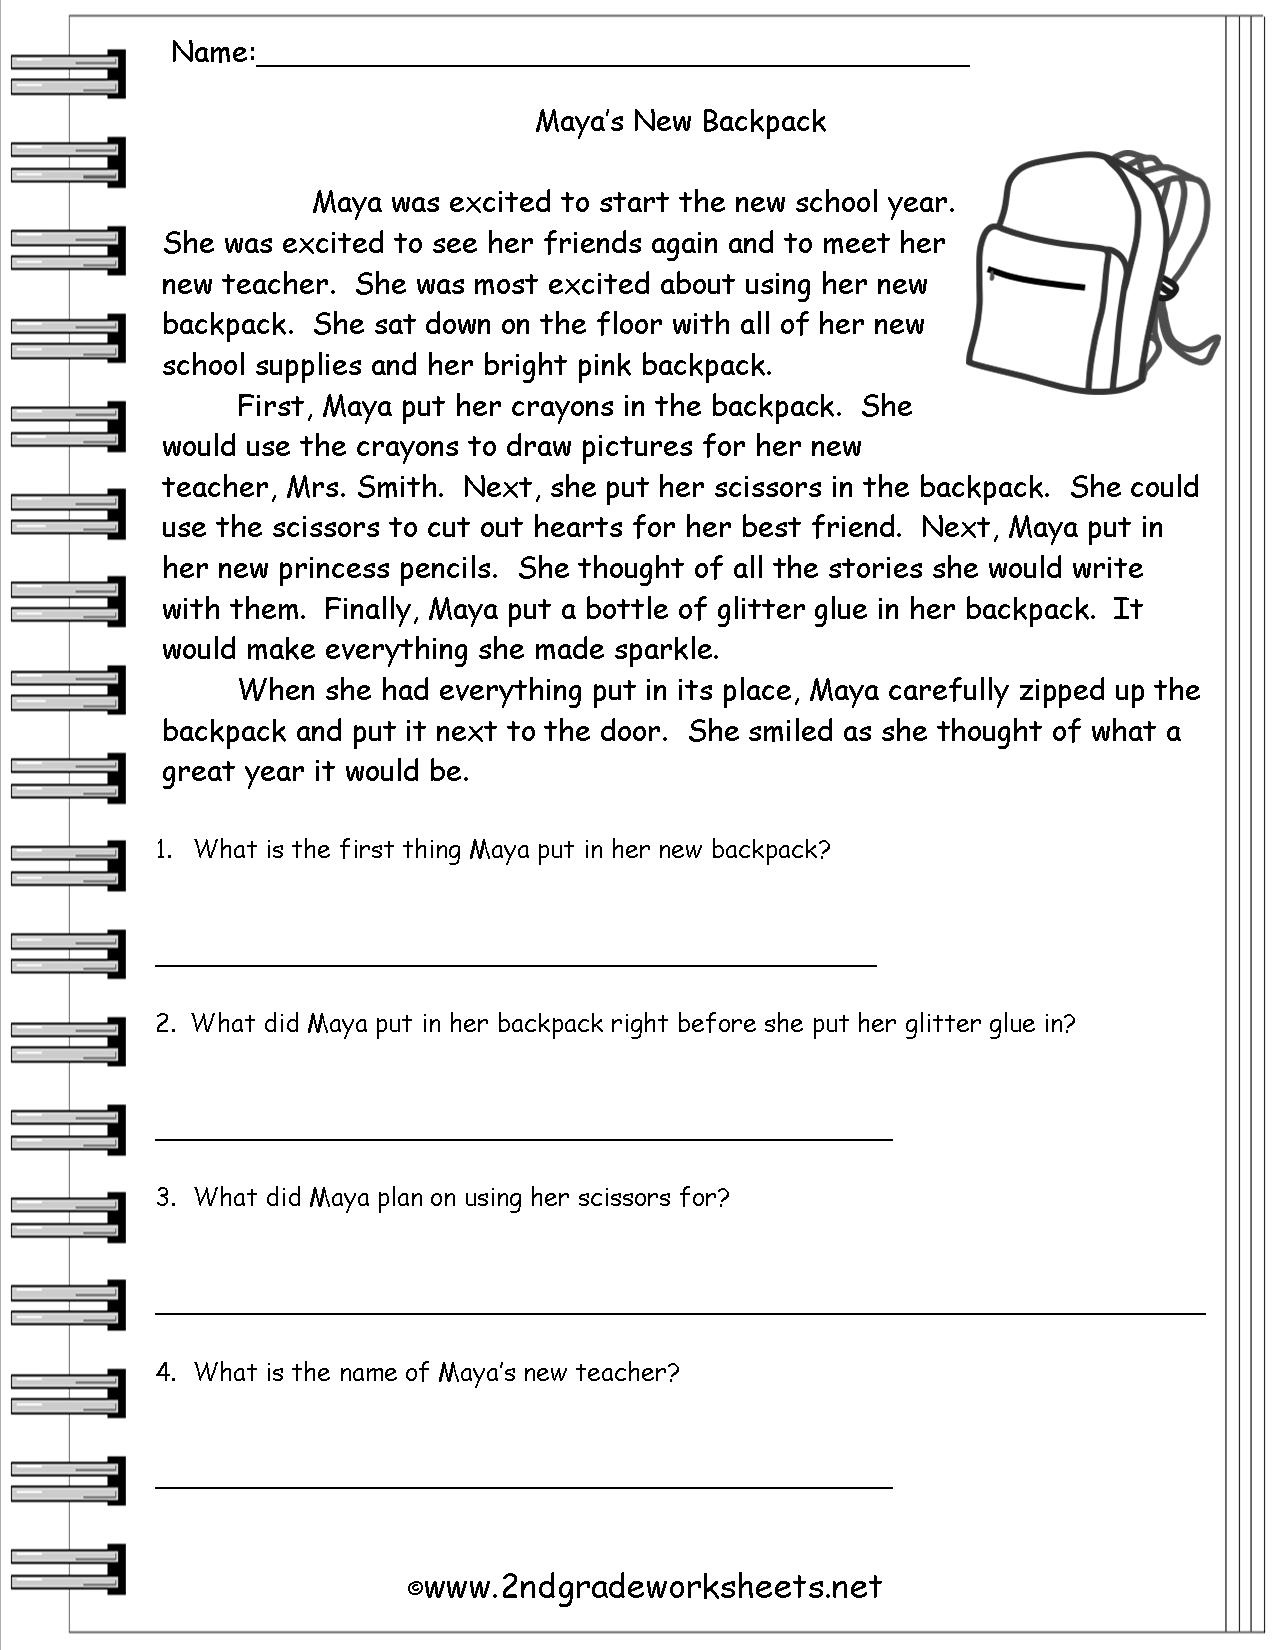 Free Printable Reading Passages With Questions